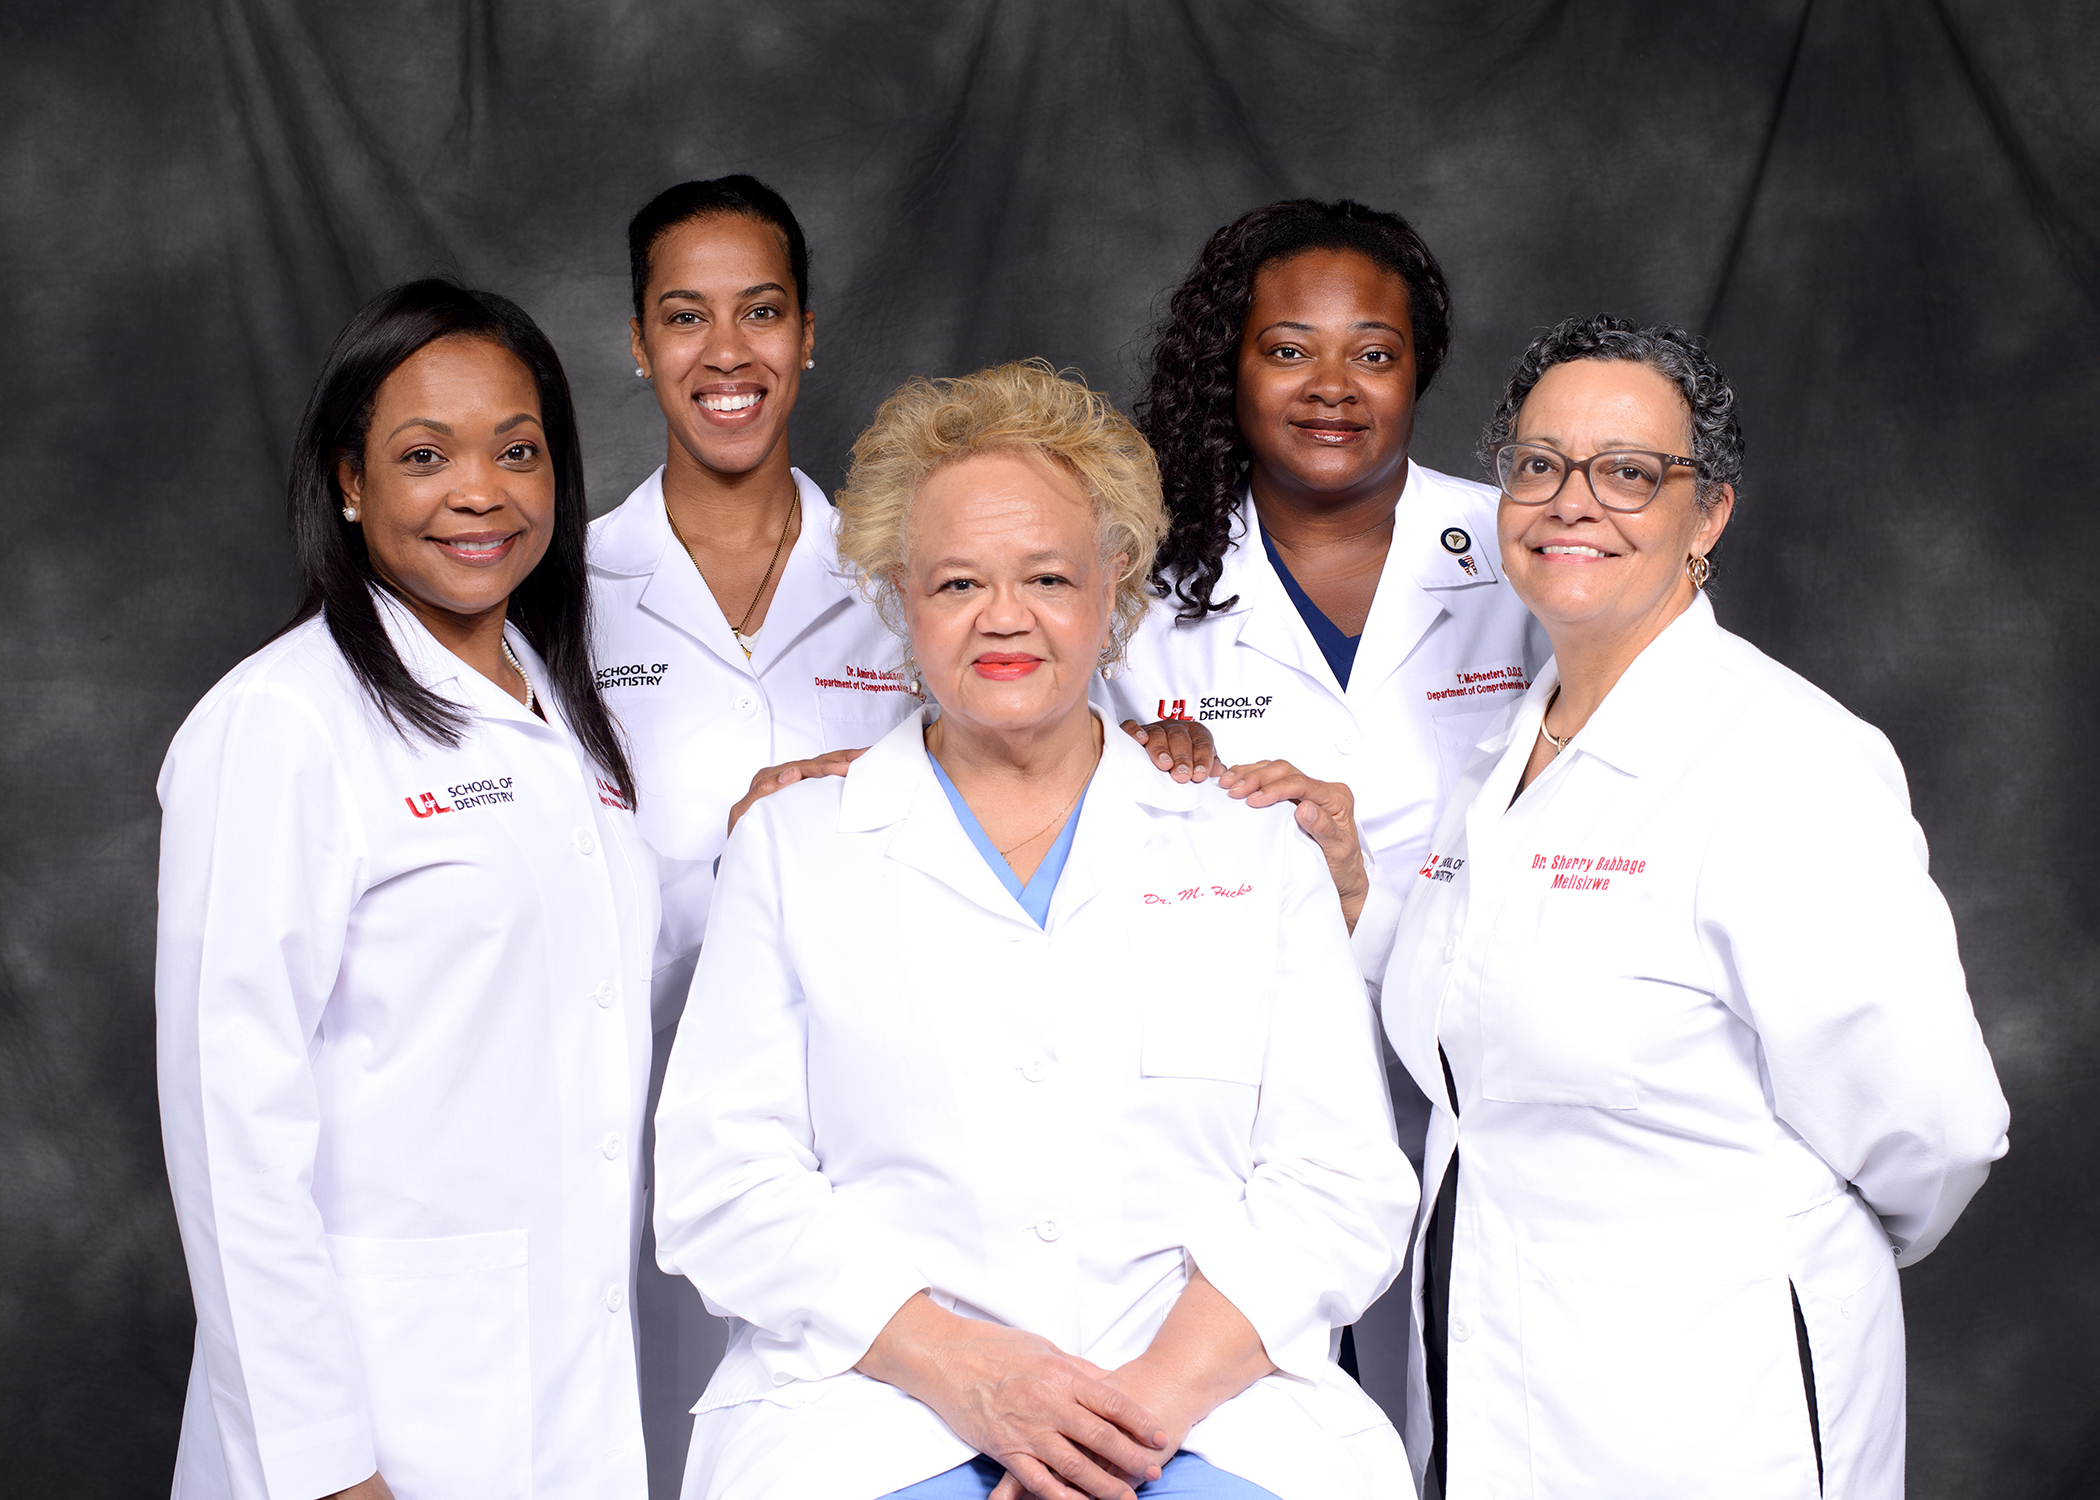 UofL faculty members work to combat racial inequality in medical education